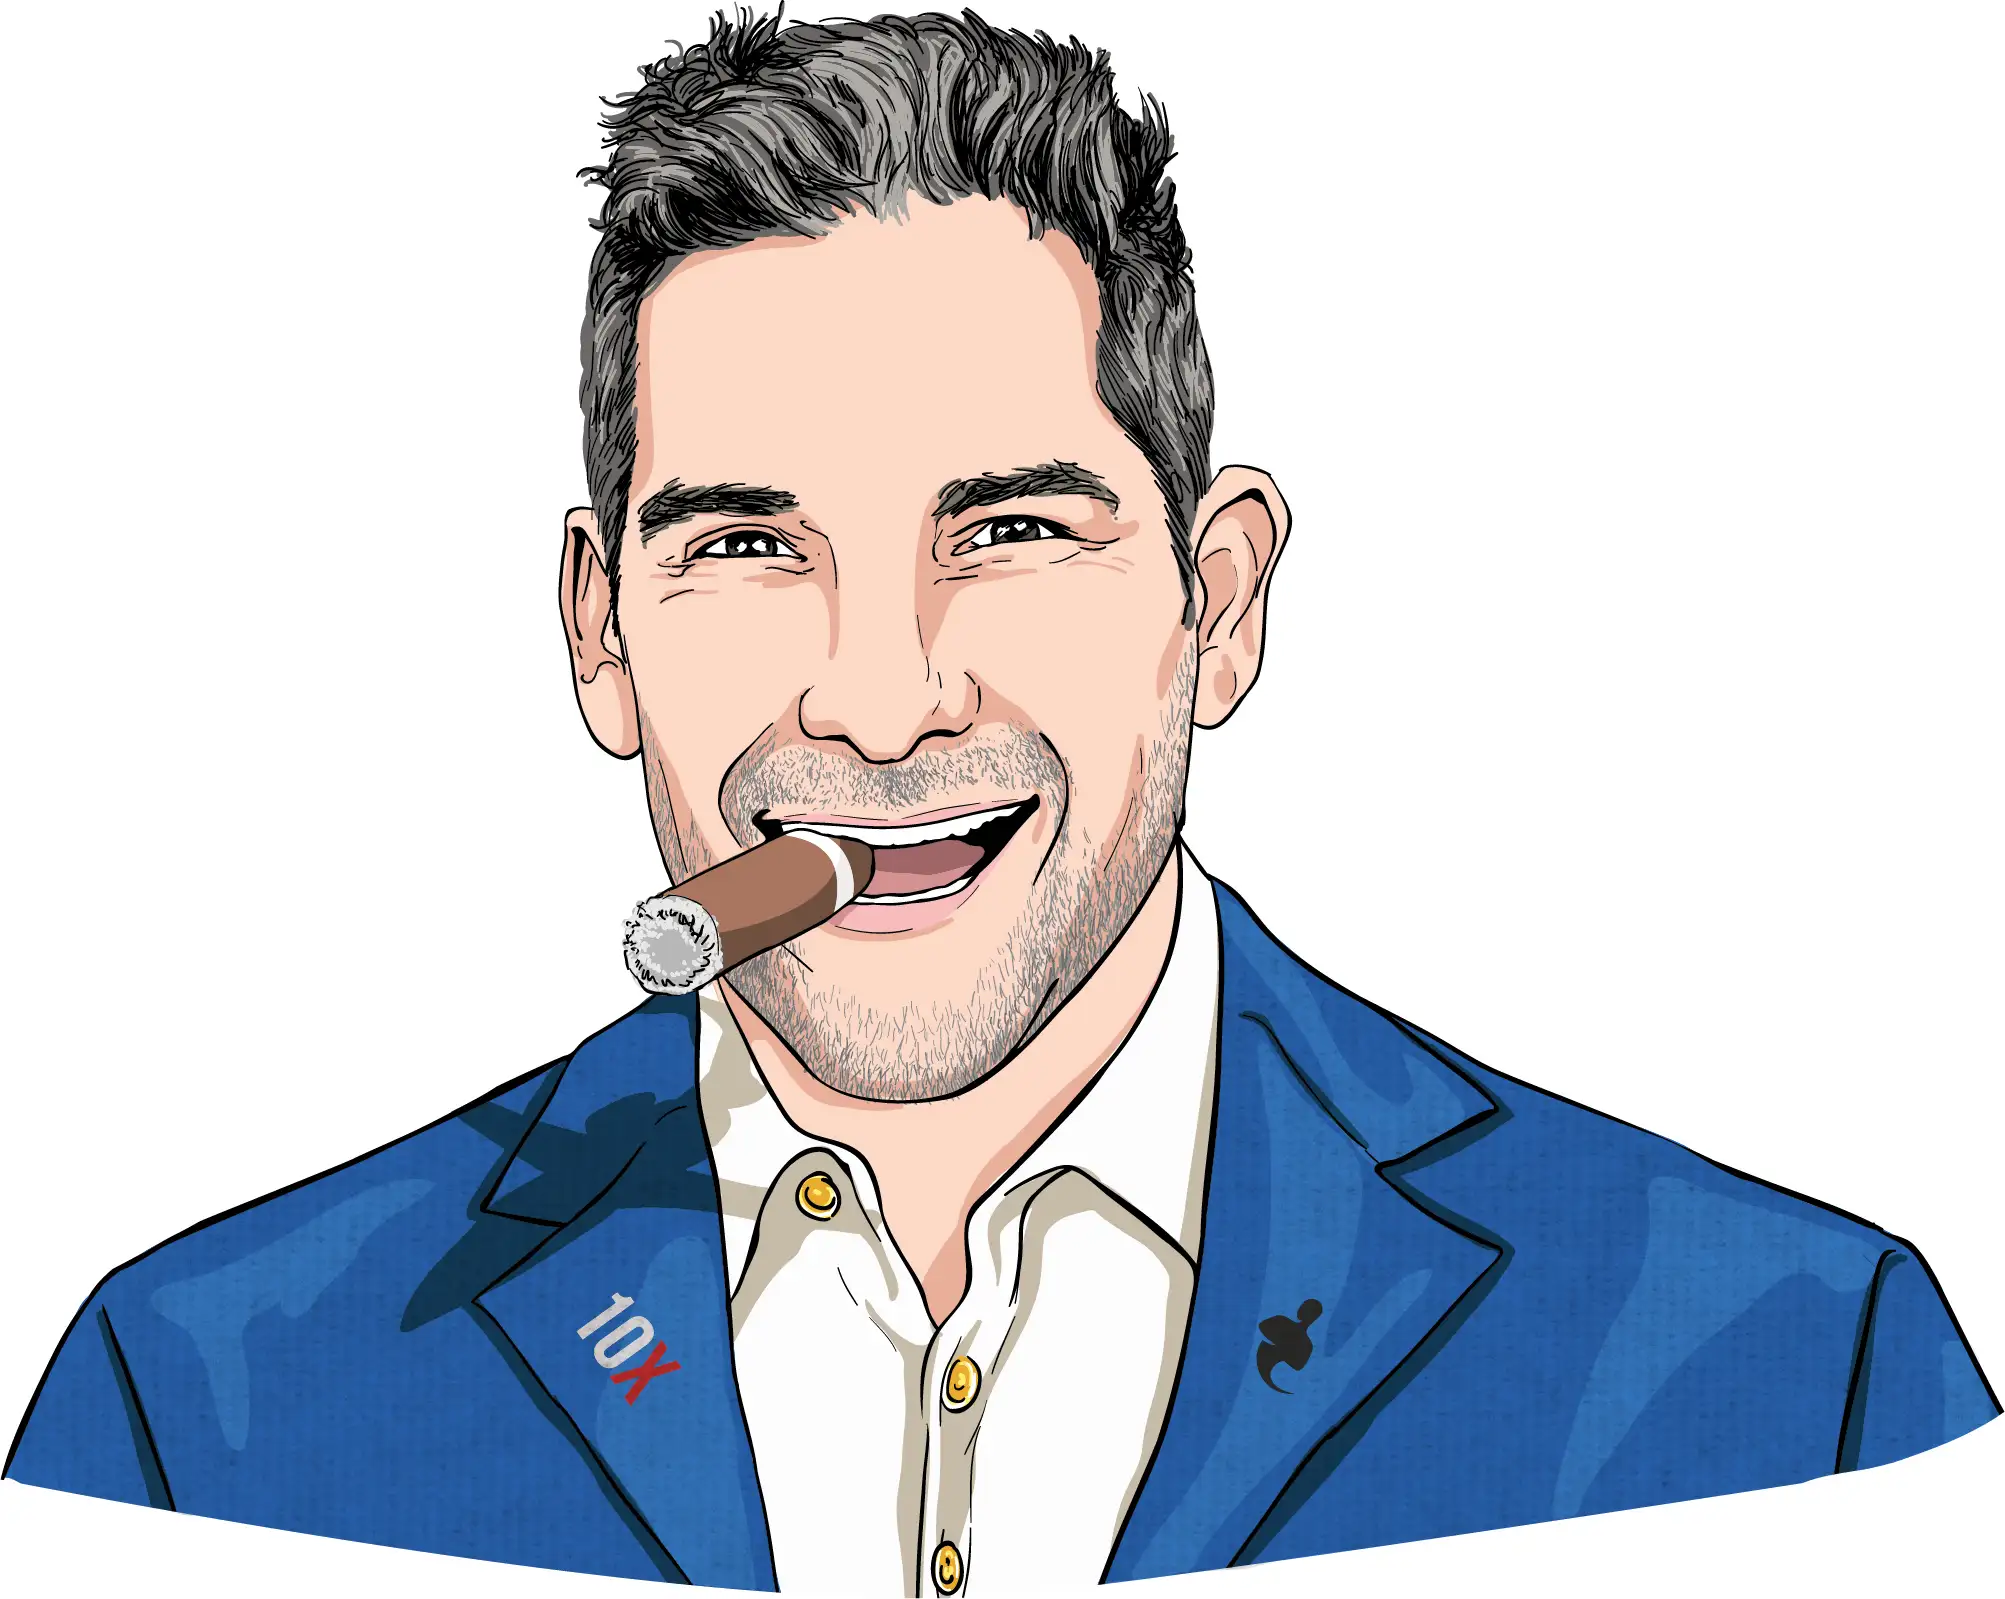 Grant Cardone Portrait with Cigar in Mouth